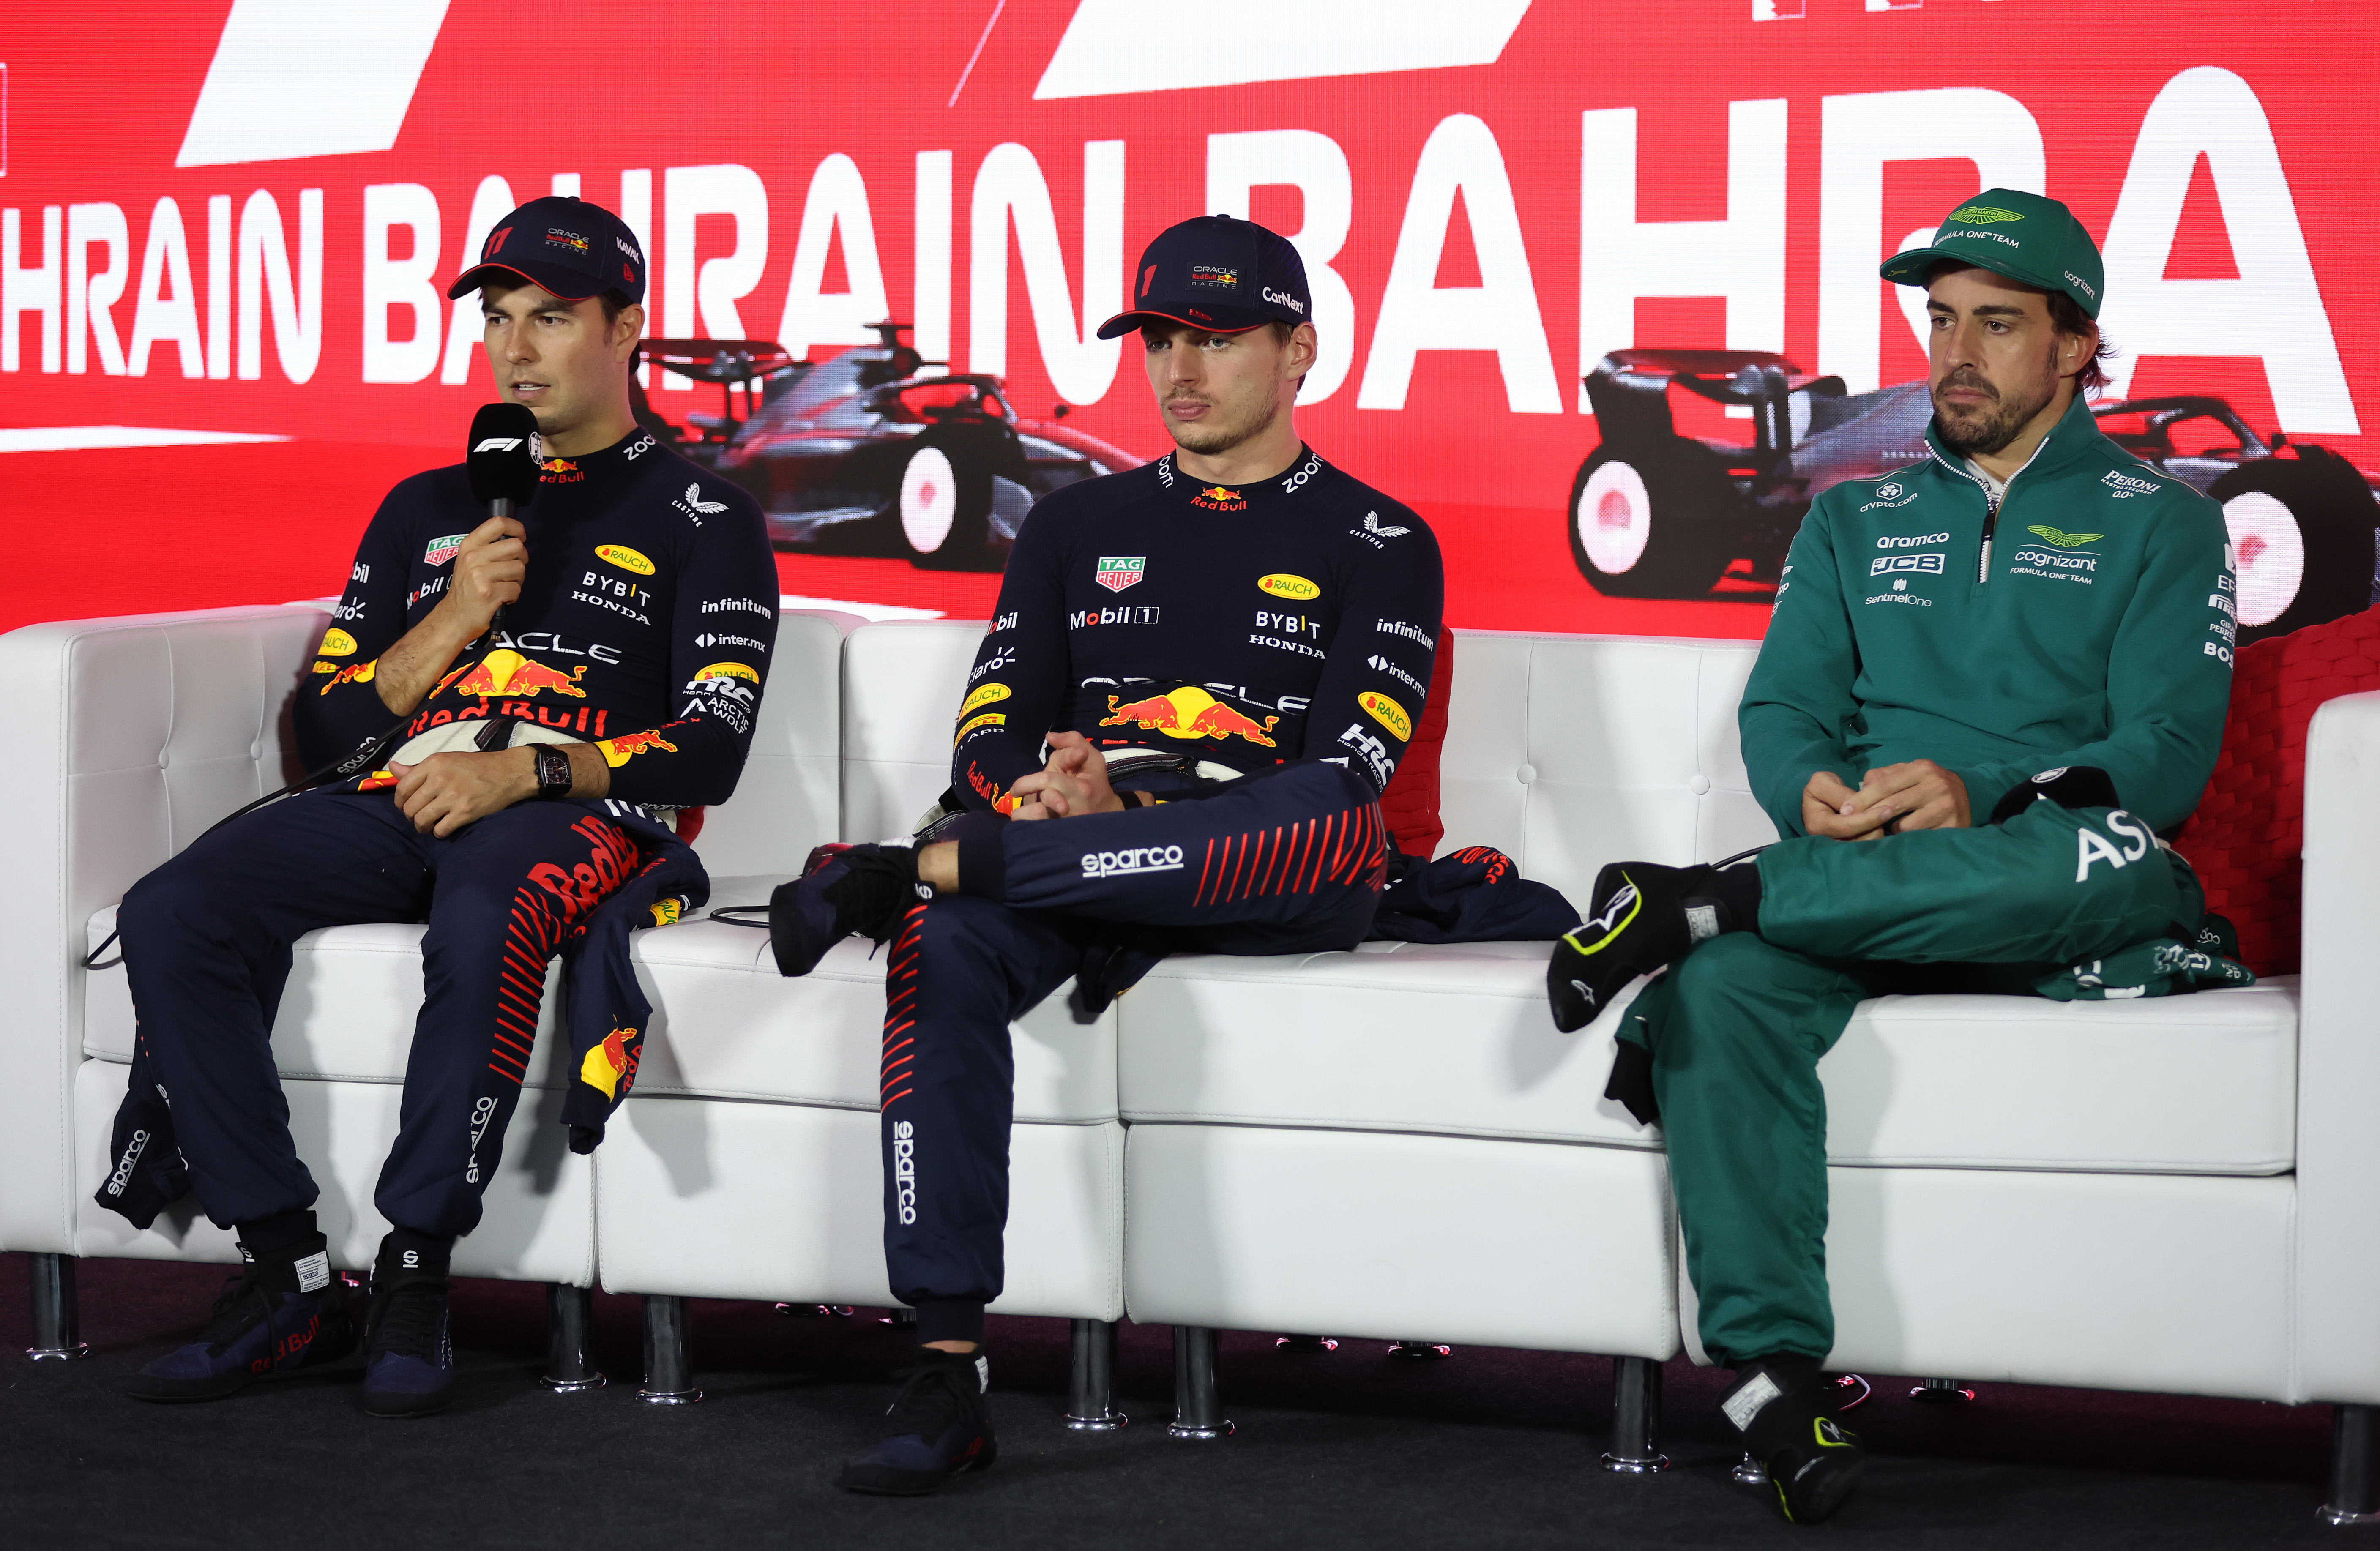 Checo Pérez, Max Verstappen and Fernando Alonso at the press conference after the Bahrain GP.